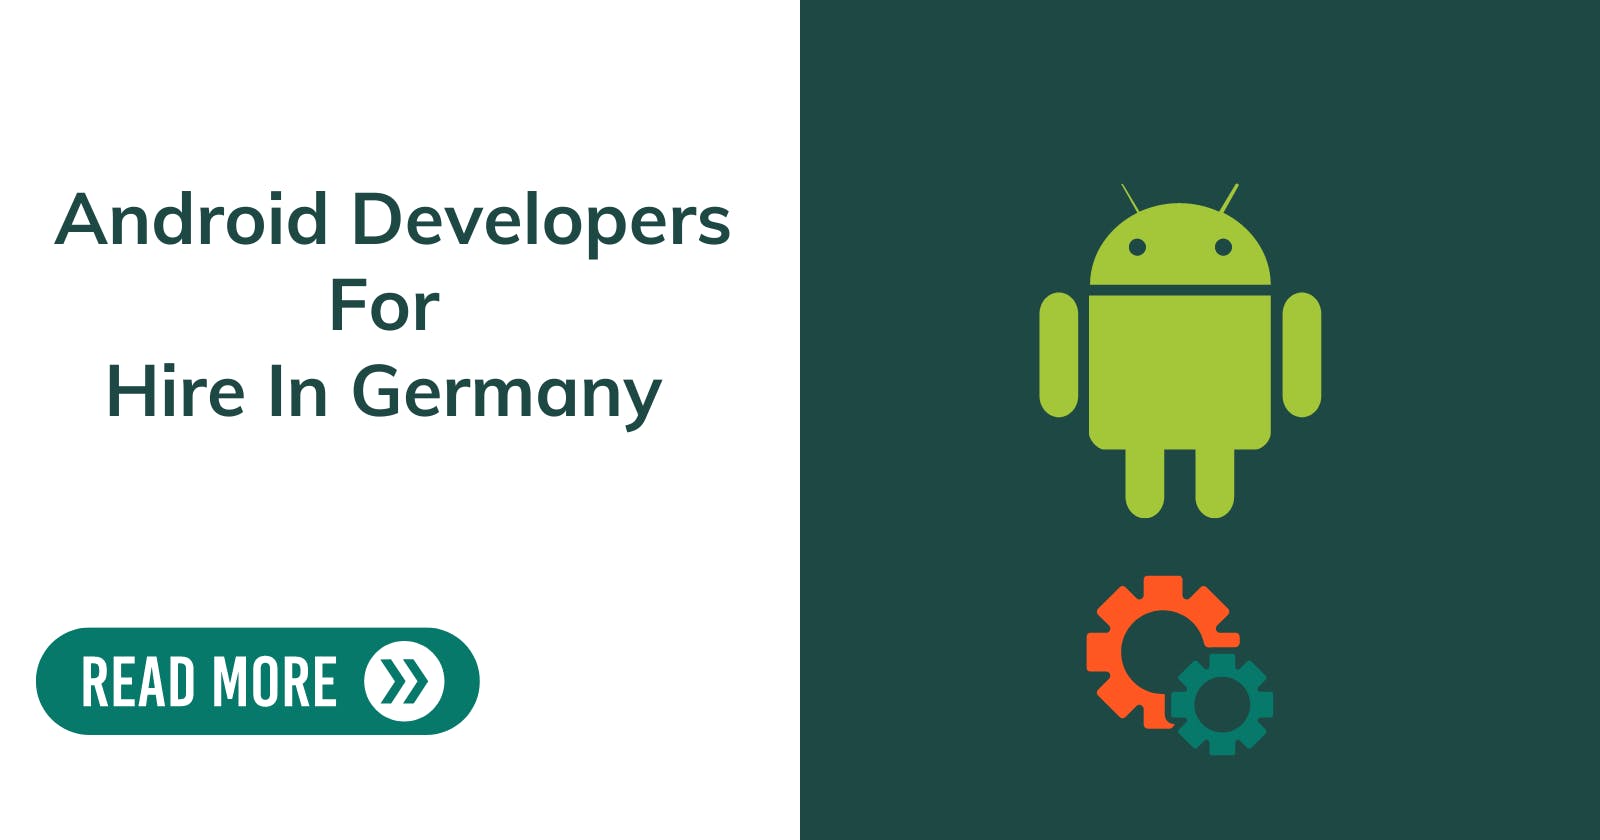 Android Developers For Hire In Germany